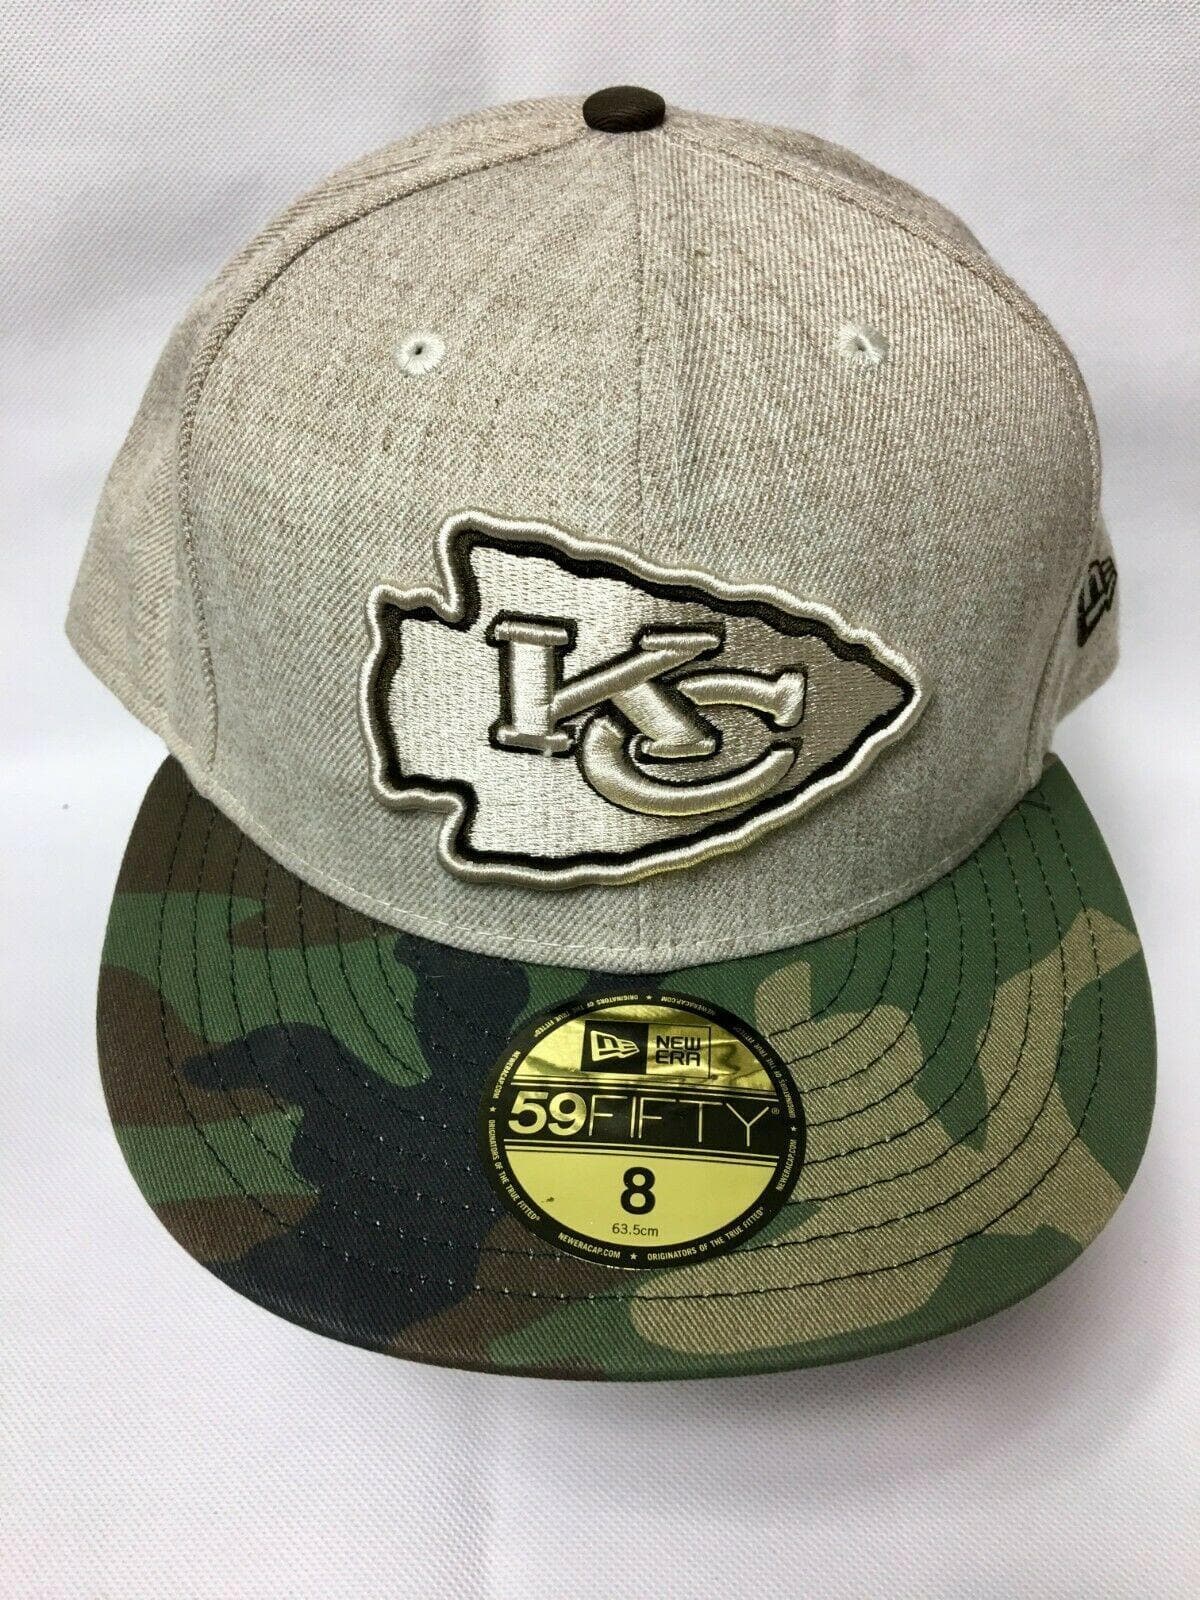 NFL Kansas City Chiefs New Era 59FIFTY Camo Fitted Hat/Cap Size 8 NWT